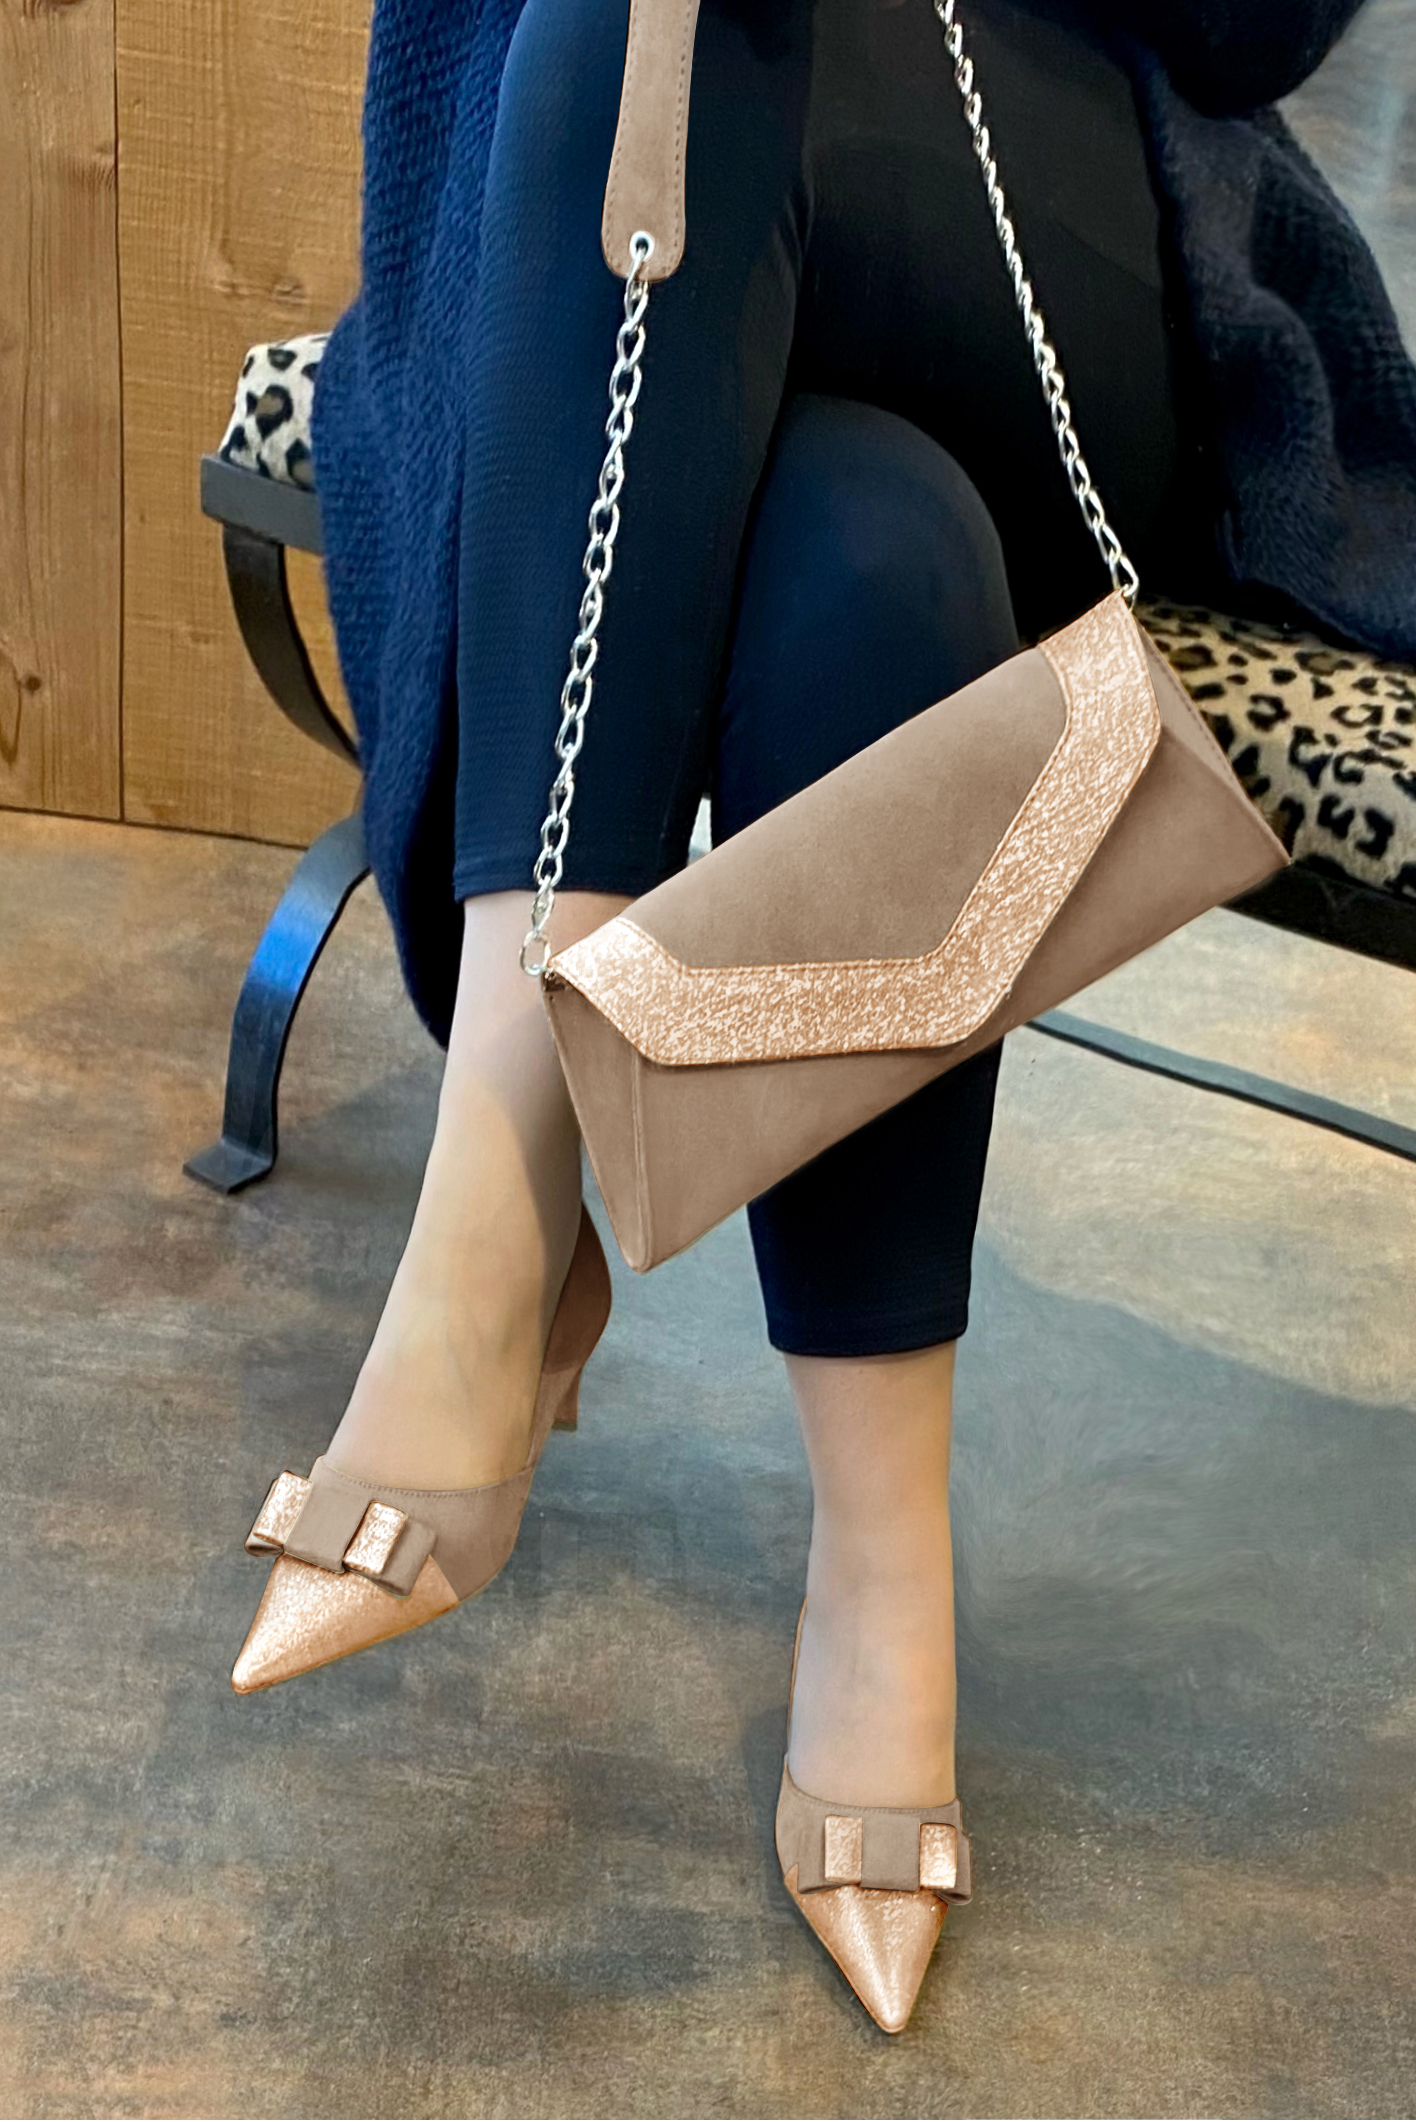 Powder pink and biscuit beige matching pumps, clutch and . Worn view - Florence KOOIJMAN